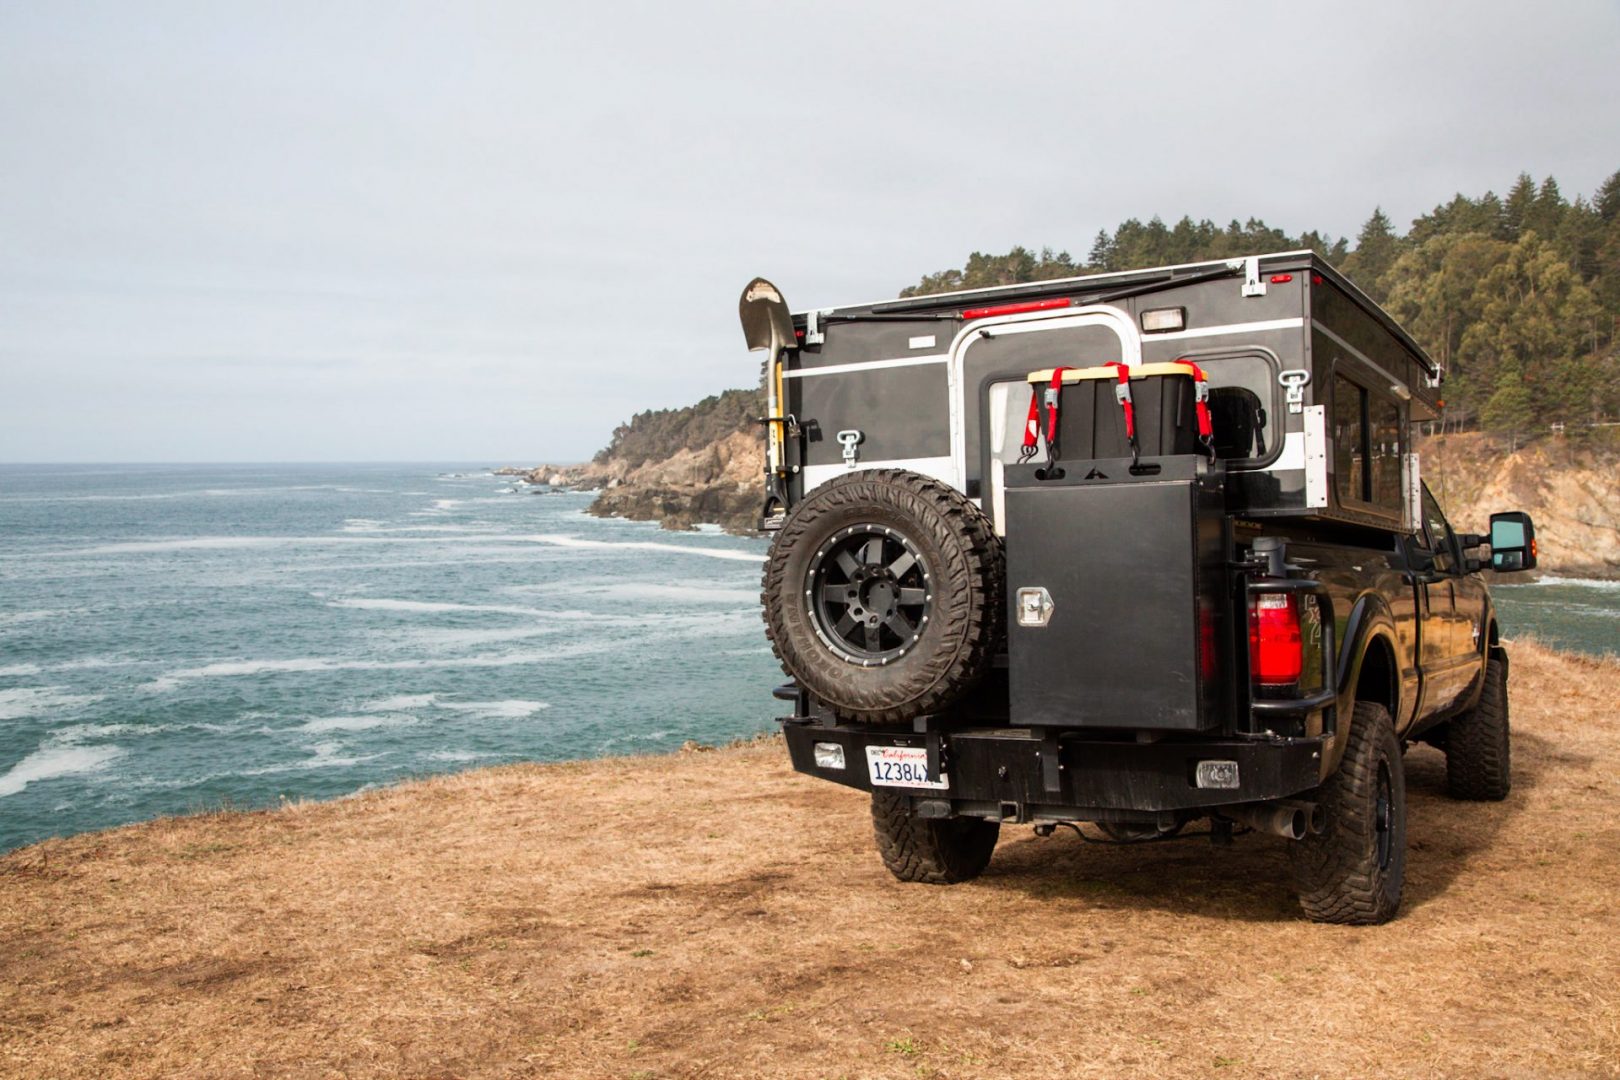 Overlanding vs. Off-Roading: What’s The Difference?